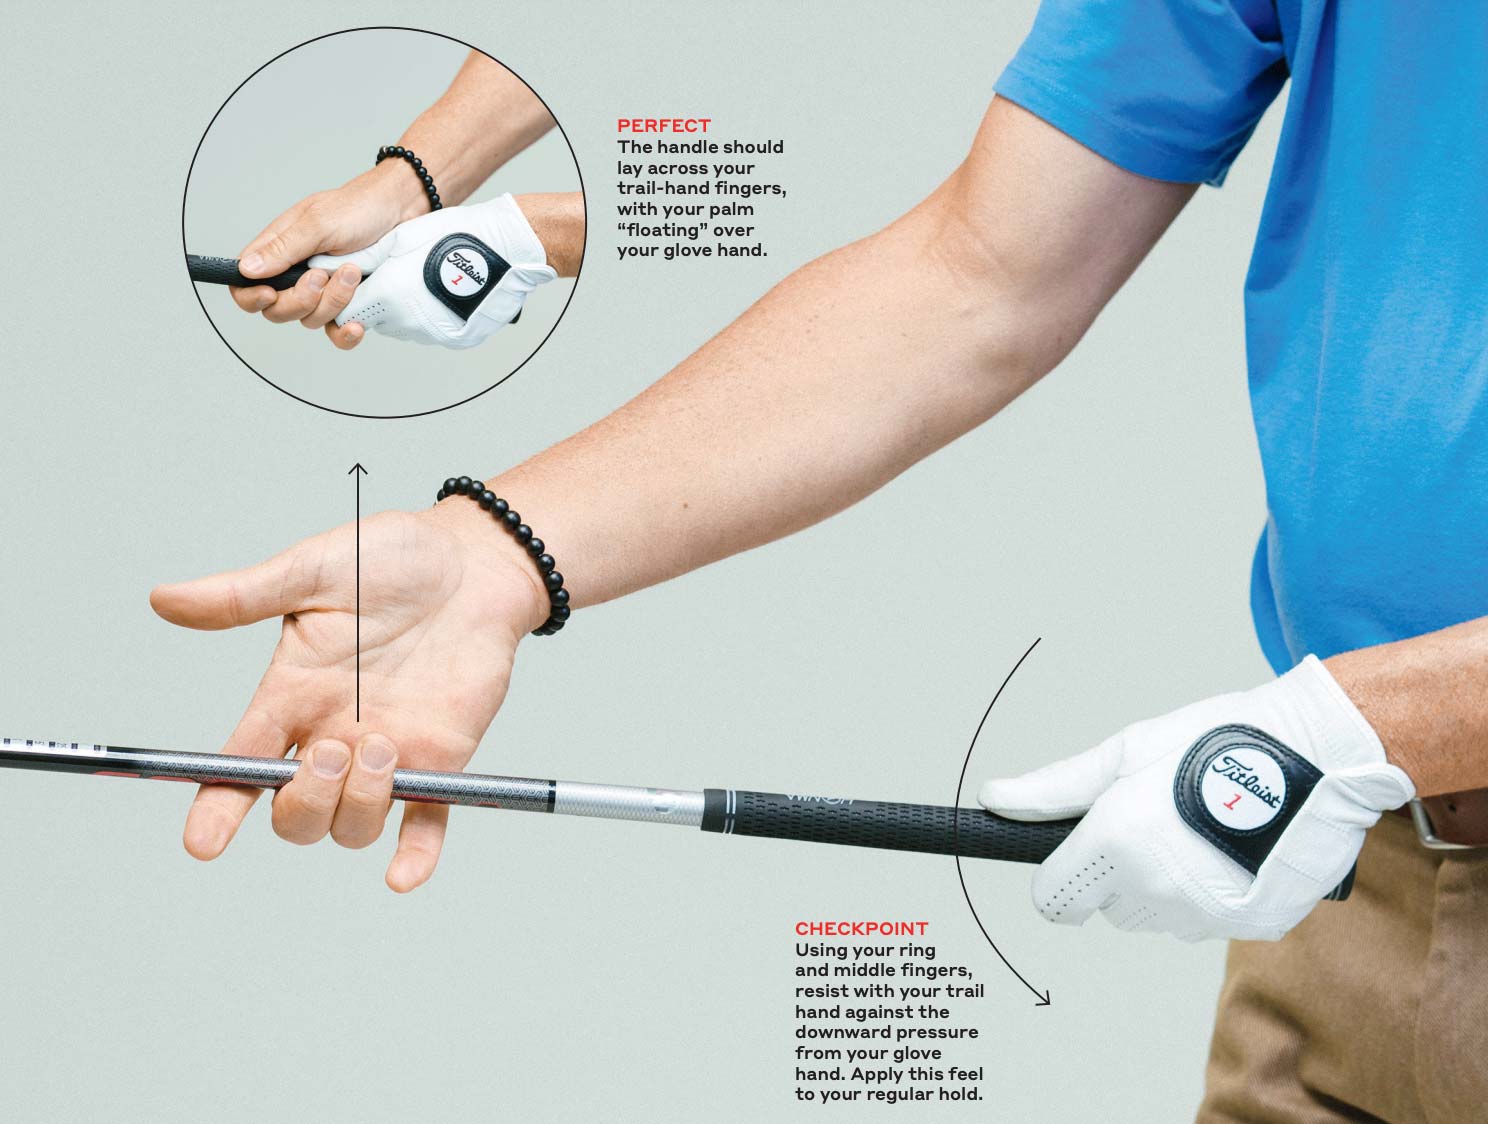 10 ways golfers can stop missing their drives to the right - Alamo